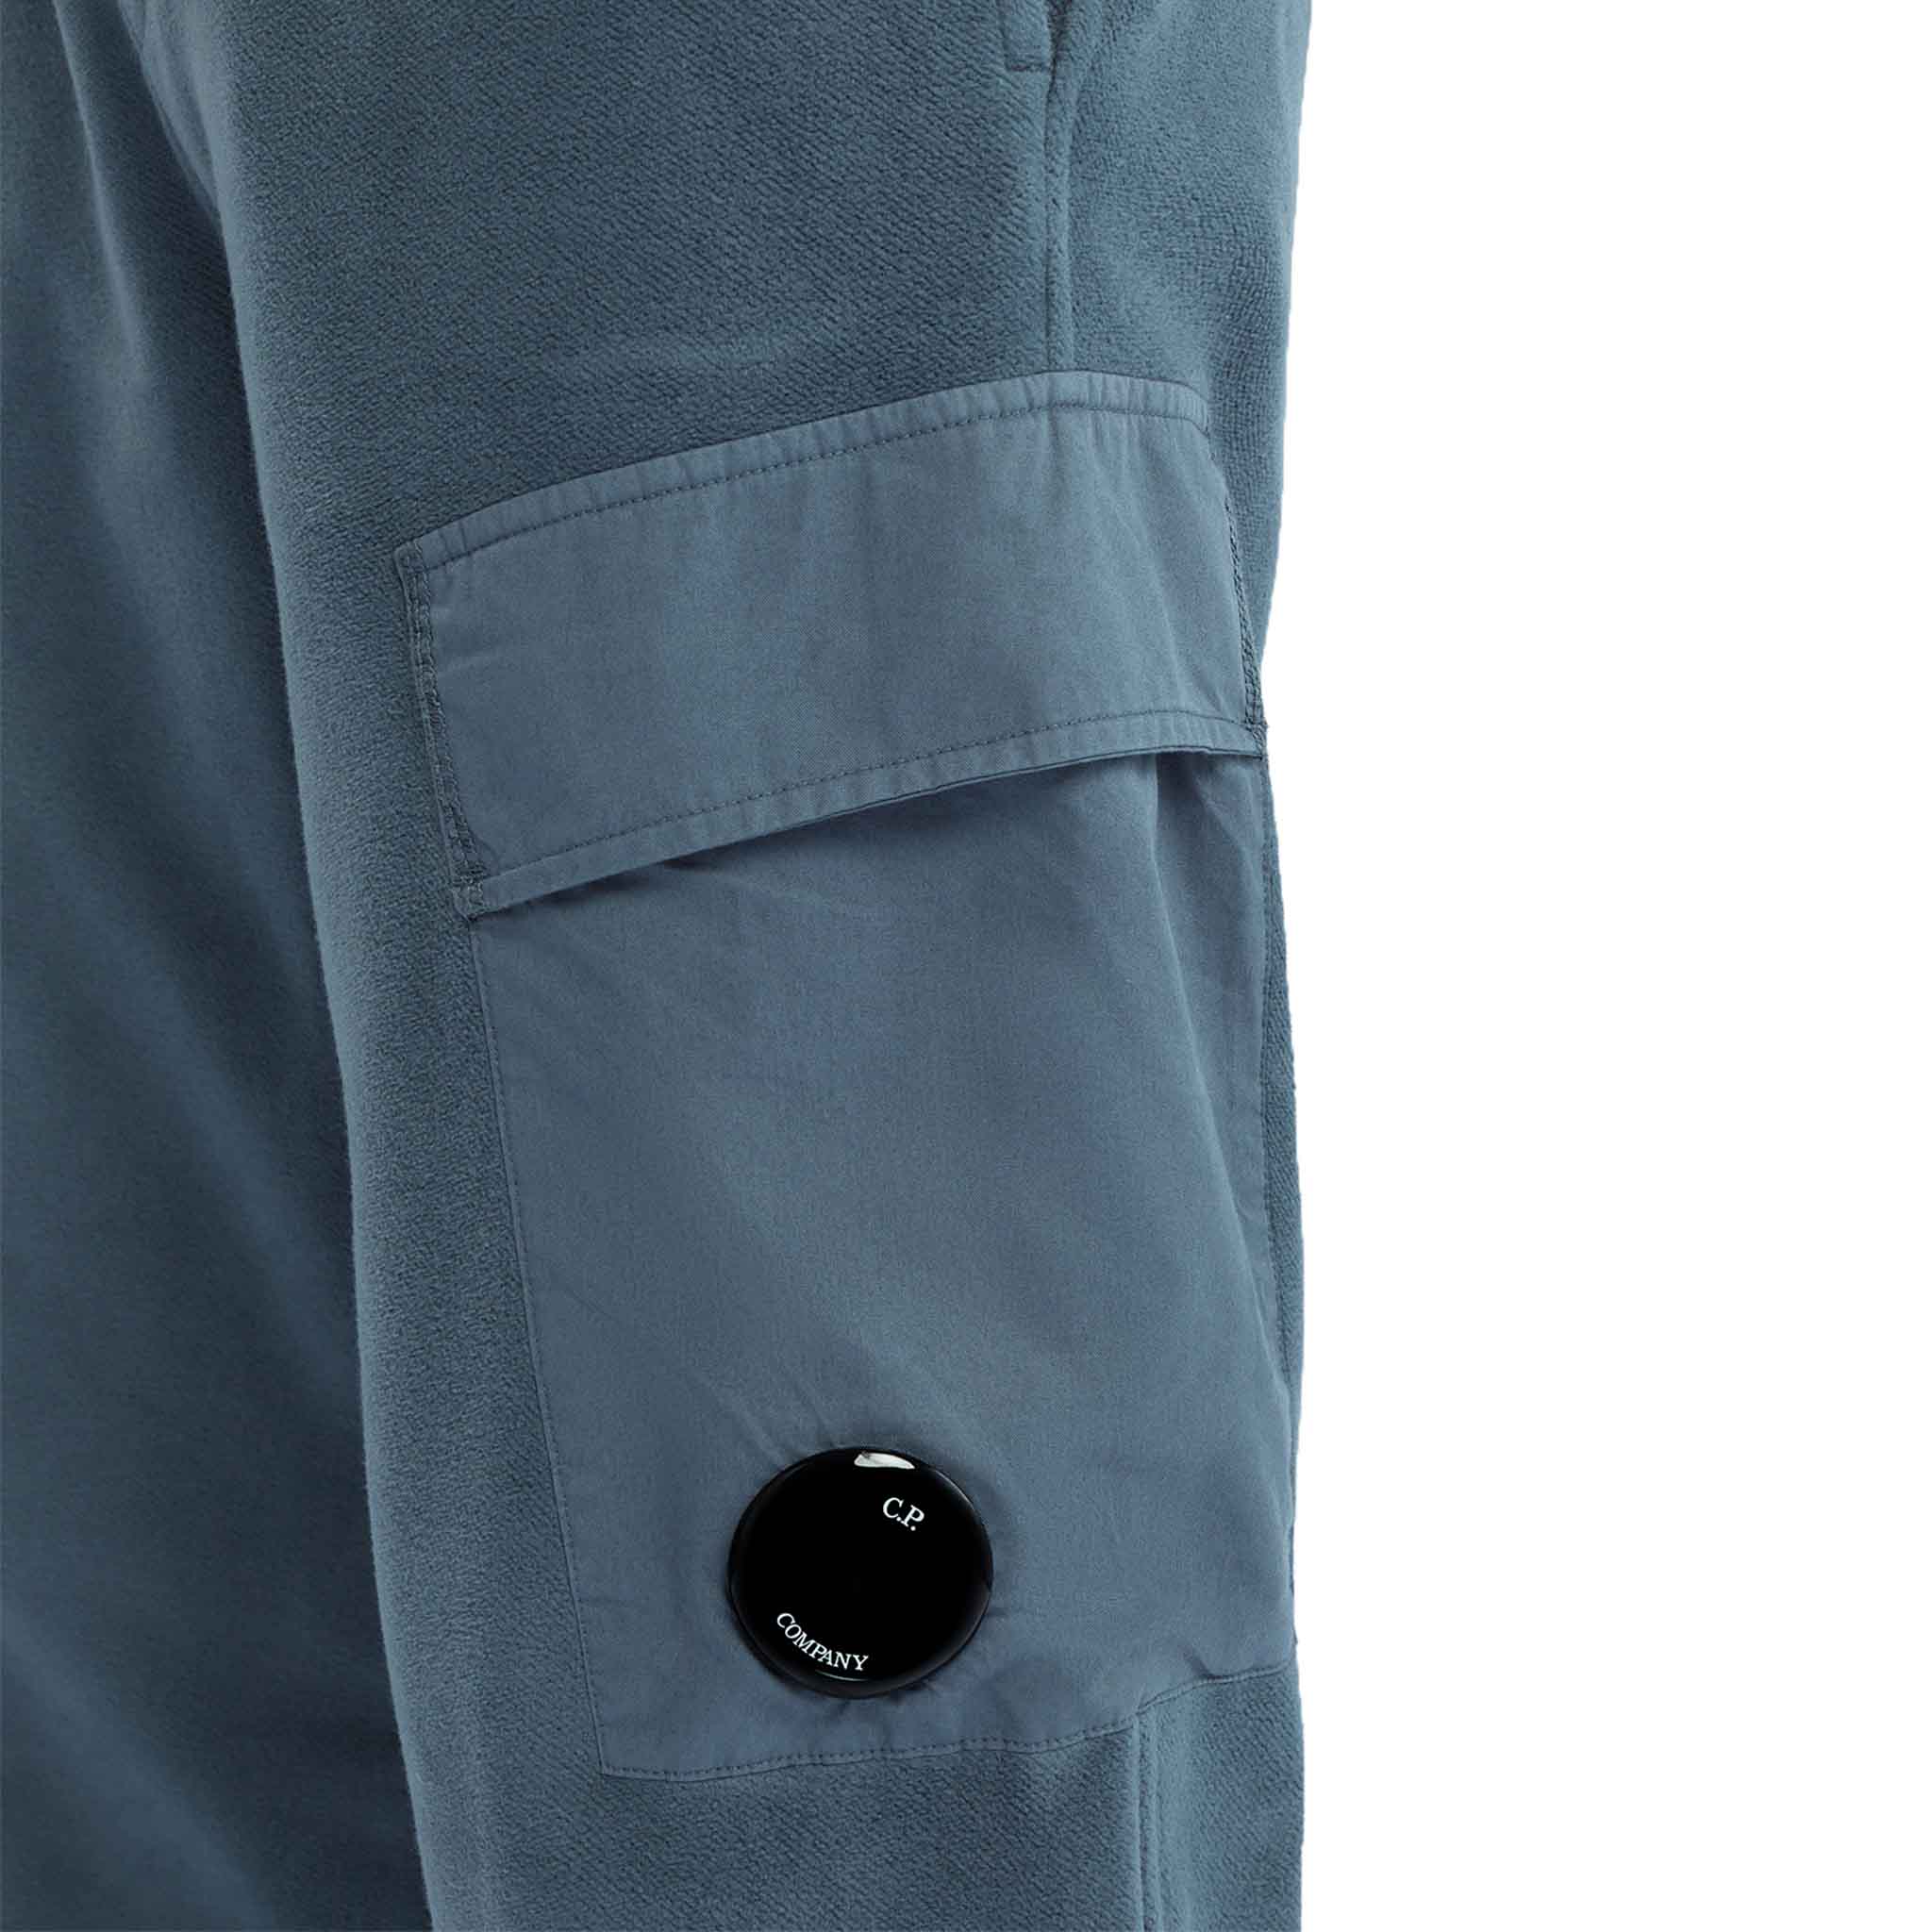 C.P. Company Reverse Brushed & Emerized Diag. Fleece Sweatpants in Orion Blue